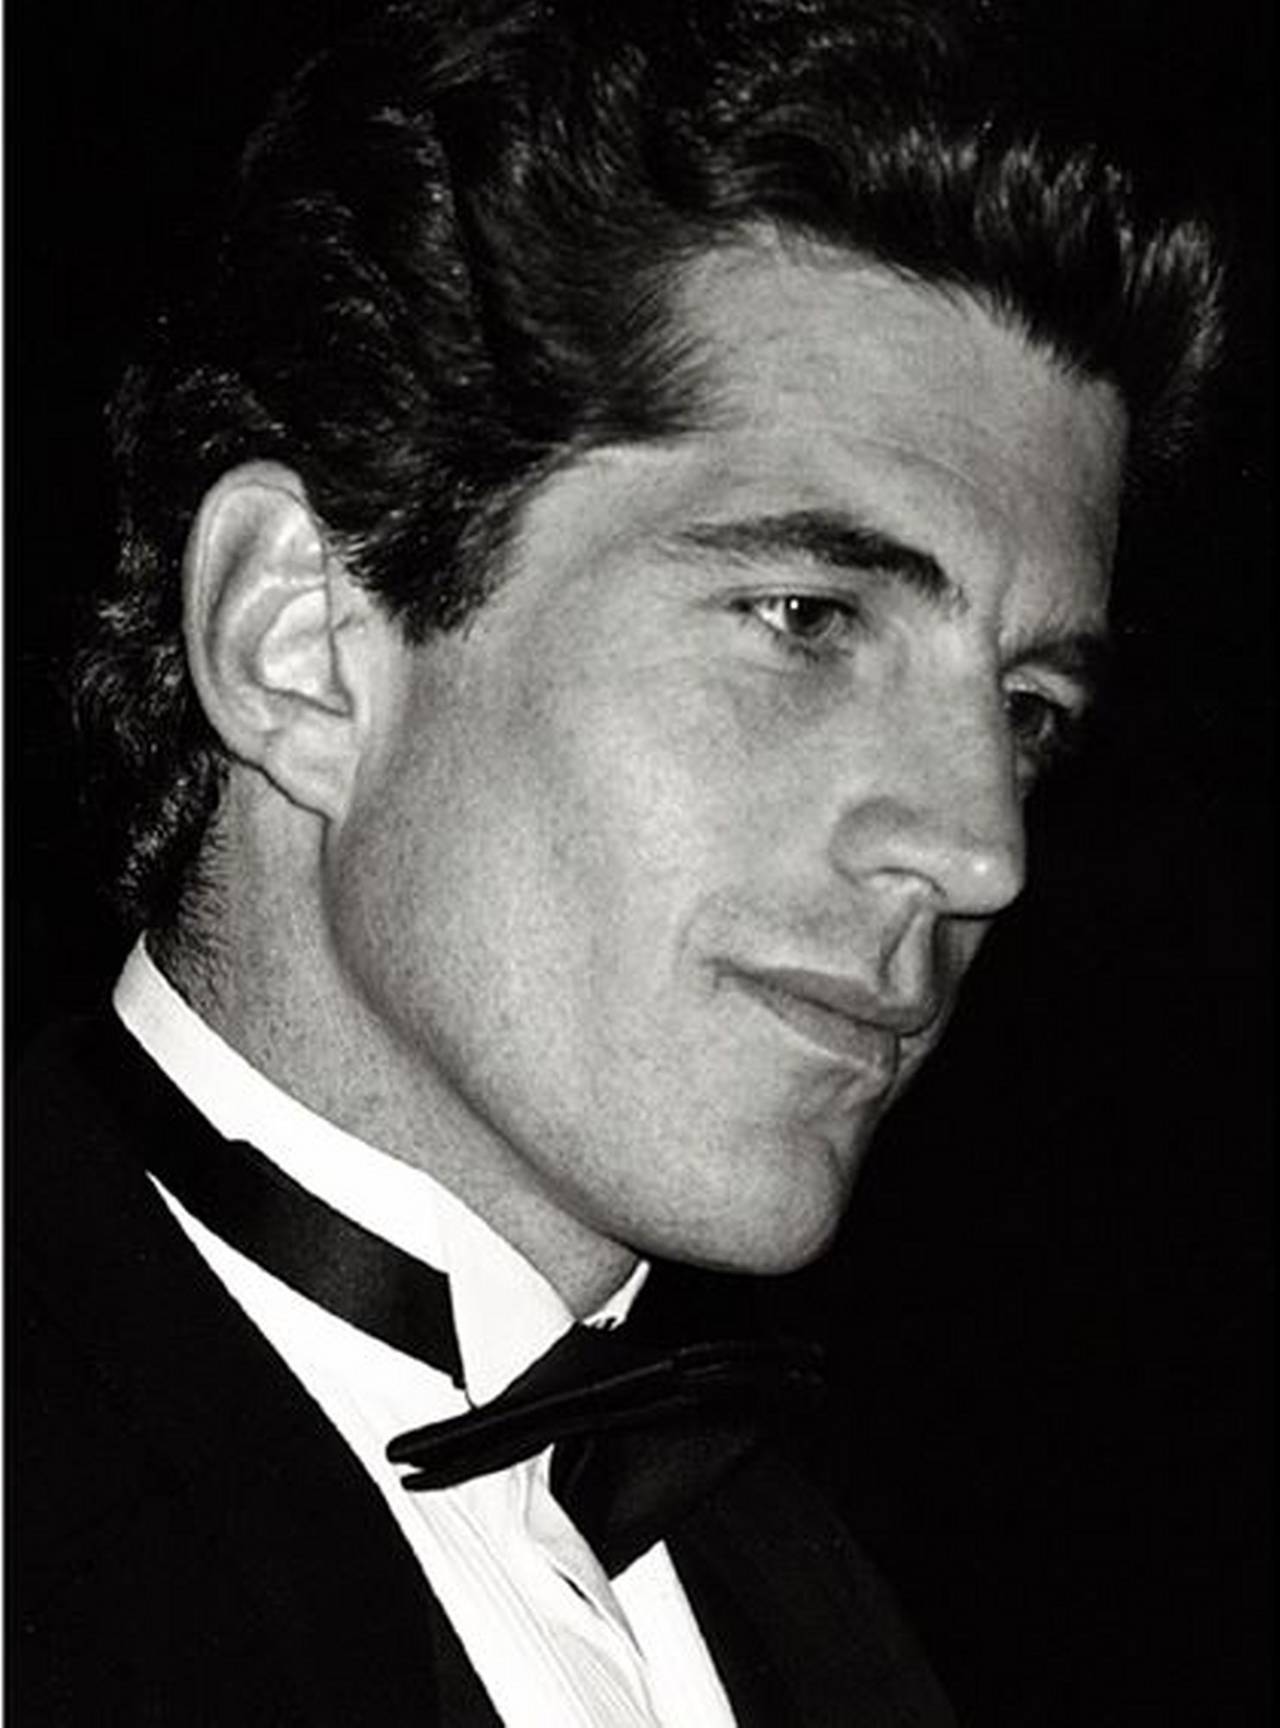 Roxanne Lowit Black and White Photograph - John F. Kennedy Jr.